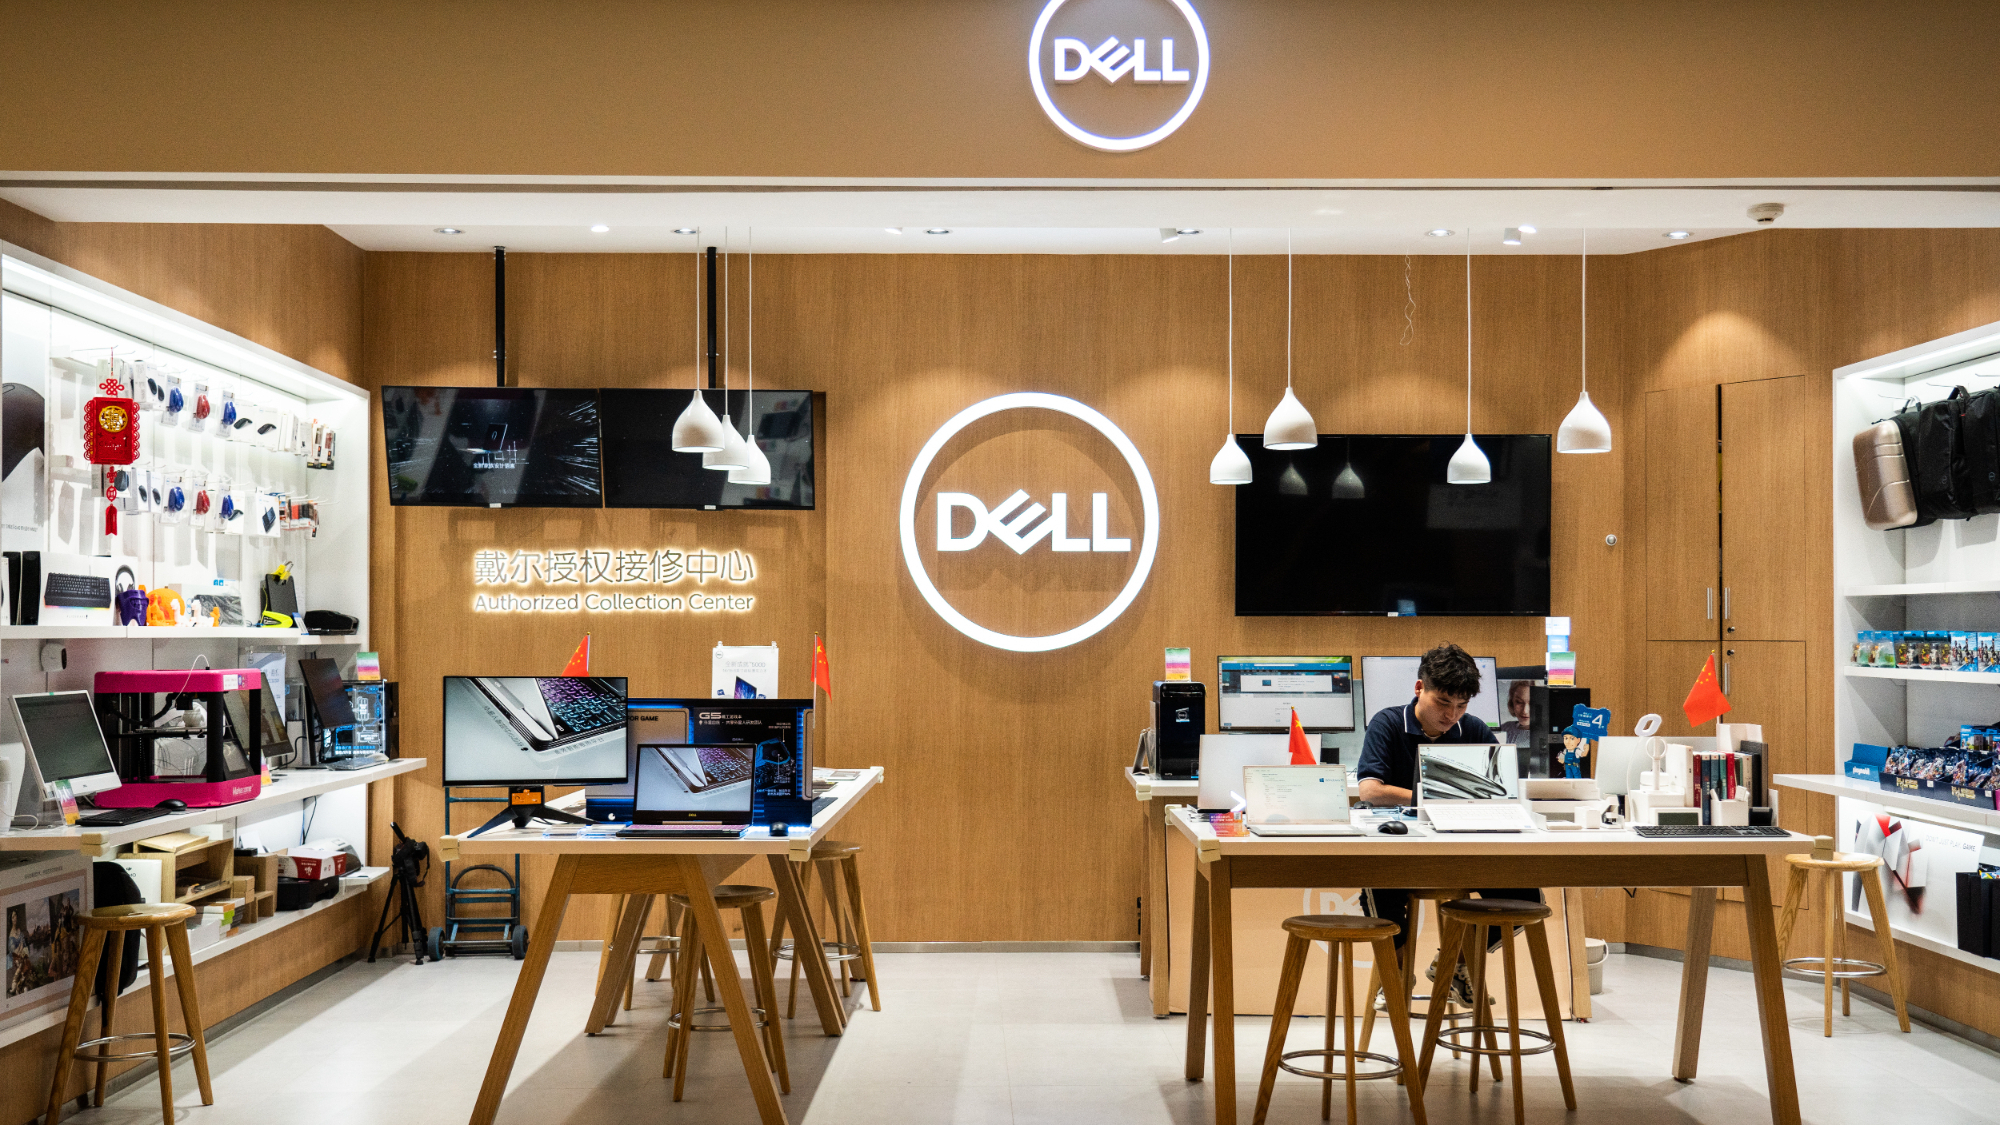  Dell to lay off 6,650 employees after underwhelming PC sales 